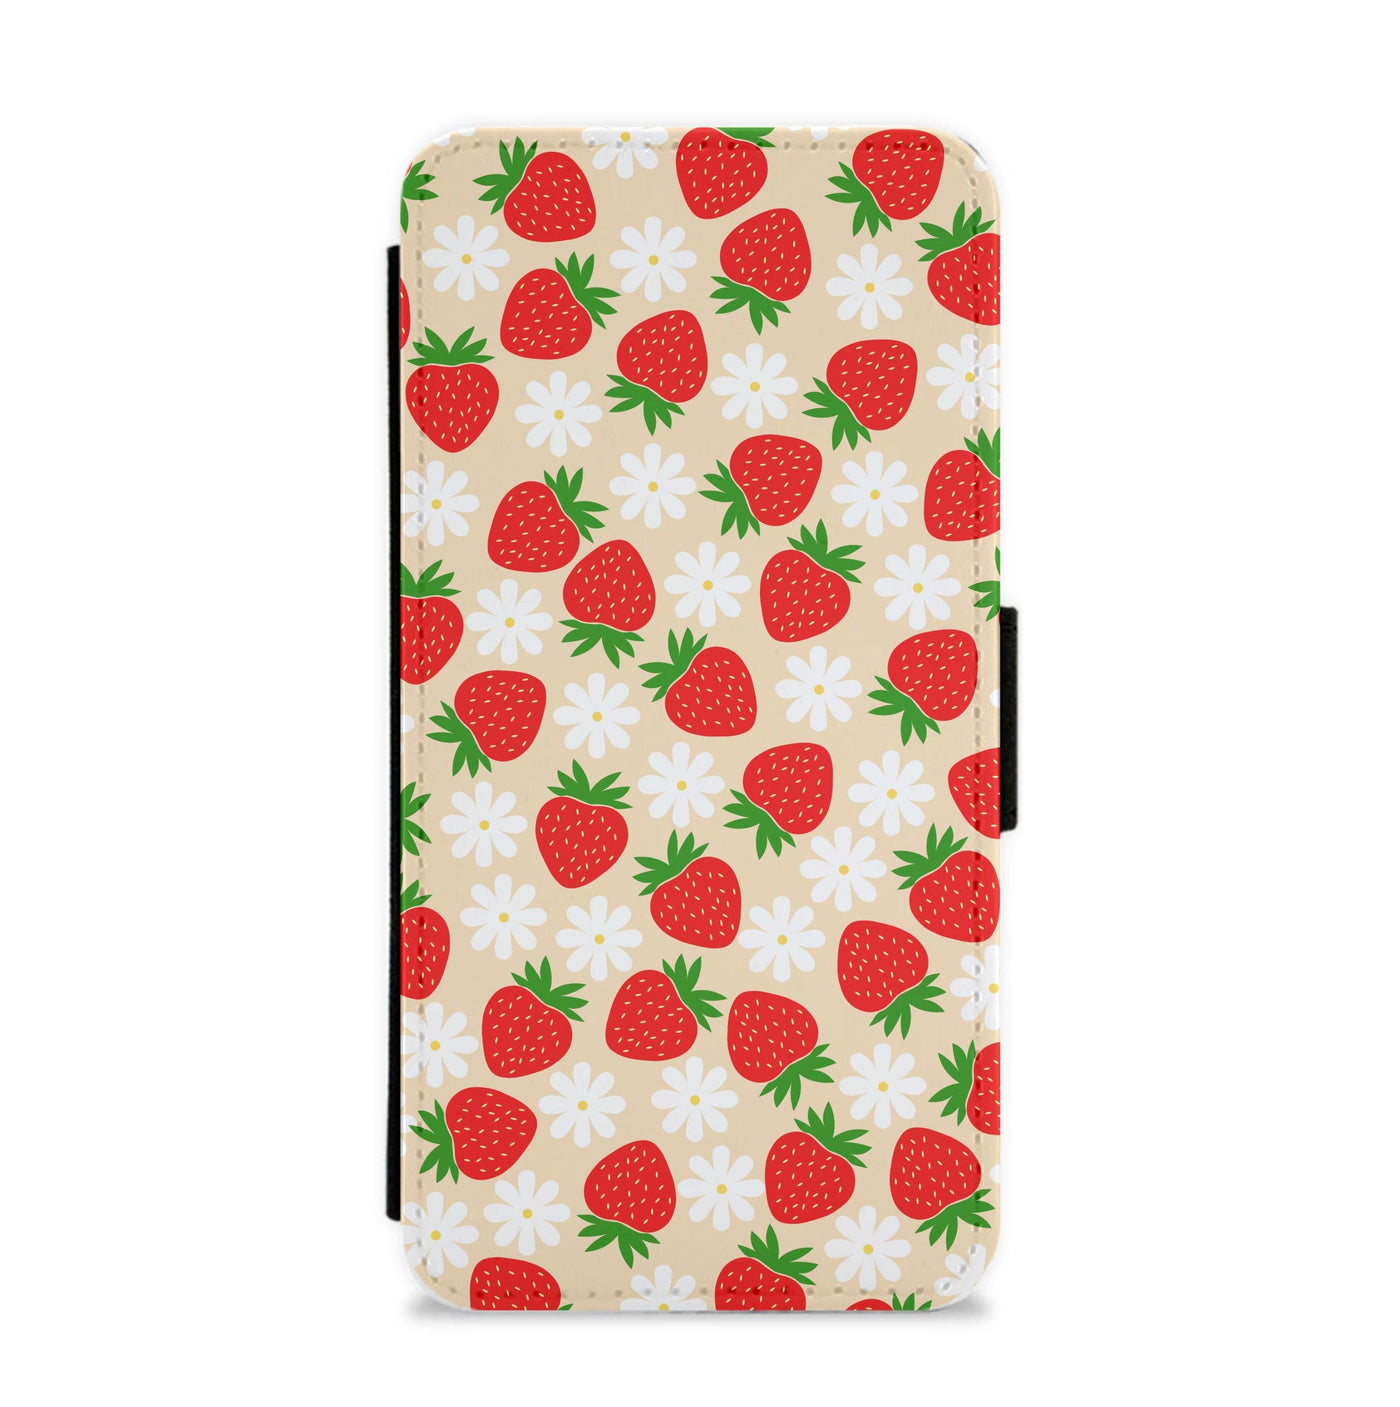 Strawberries and Flowers - Spring Patterns Flip / Wallet Phone Case